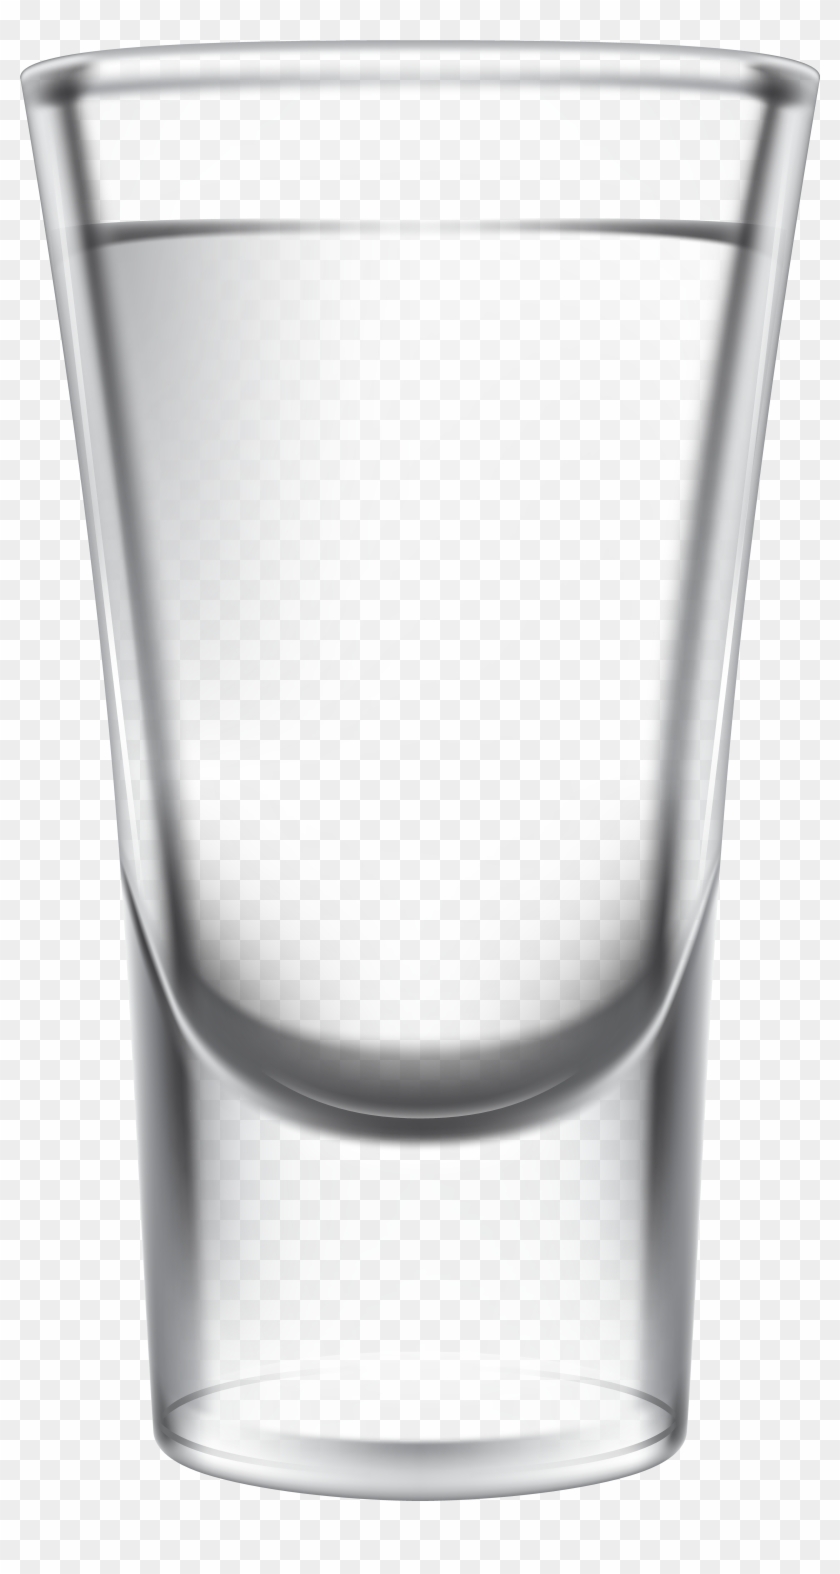 Jpg Glass Of Water Clipart Black And White - Clipart Black And White Glass Of Water - Png Download